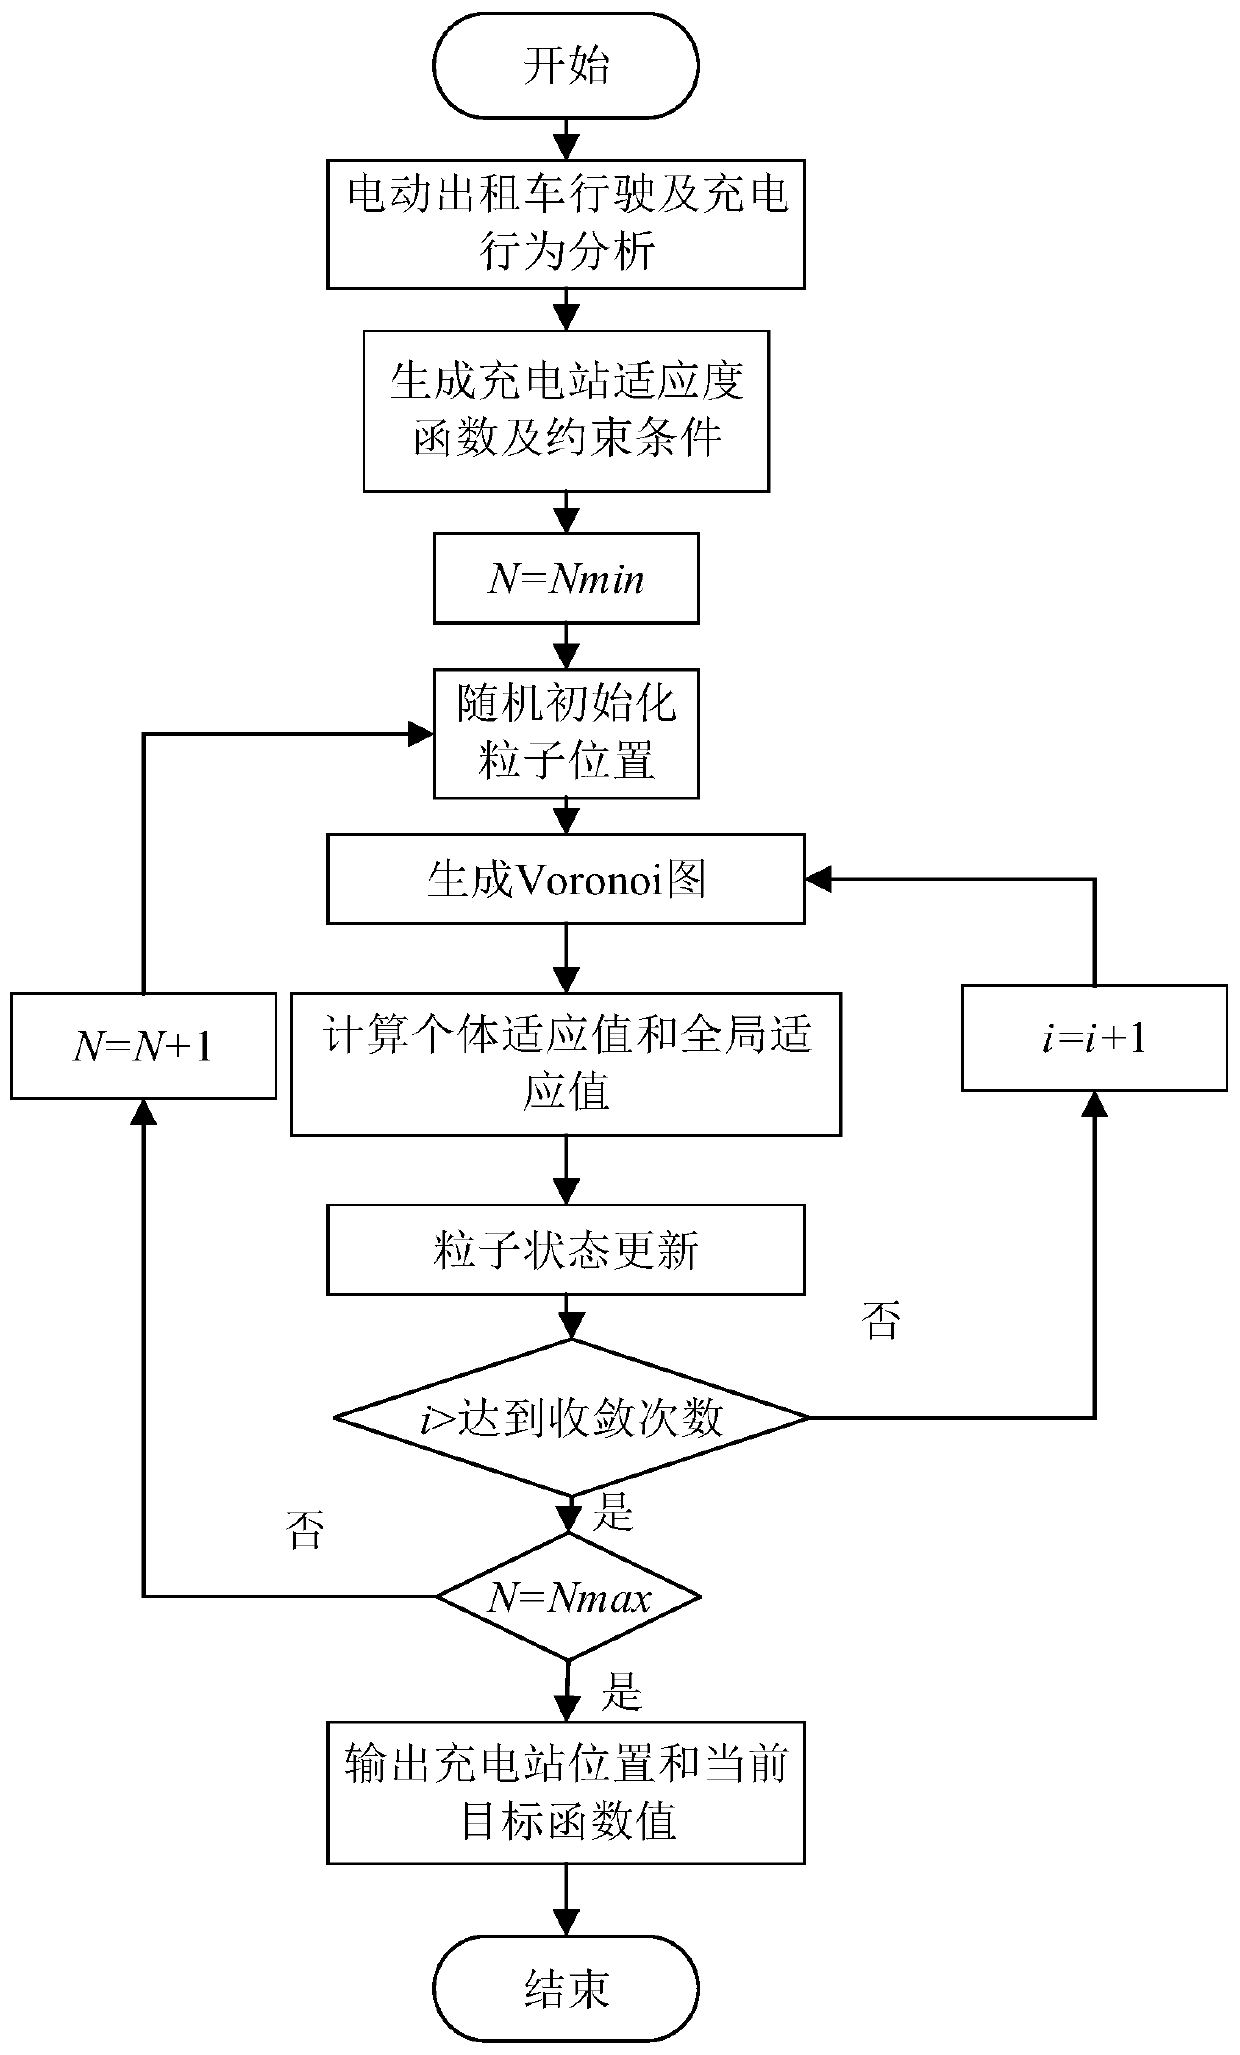 Planning method for site selection and service range division of urban electric taxi charging station